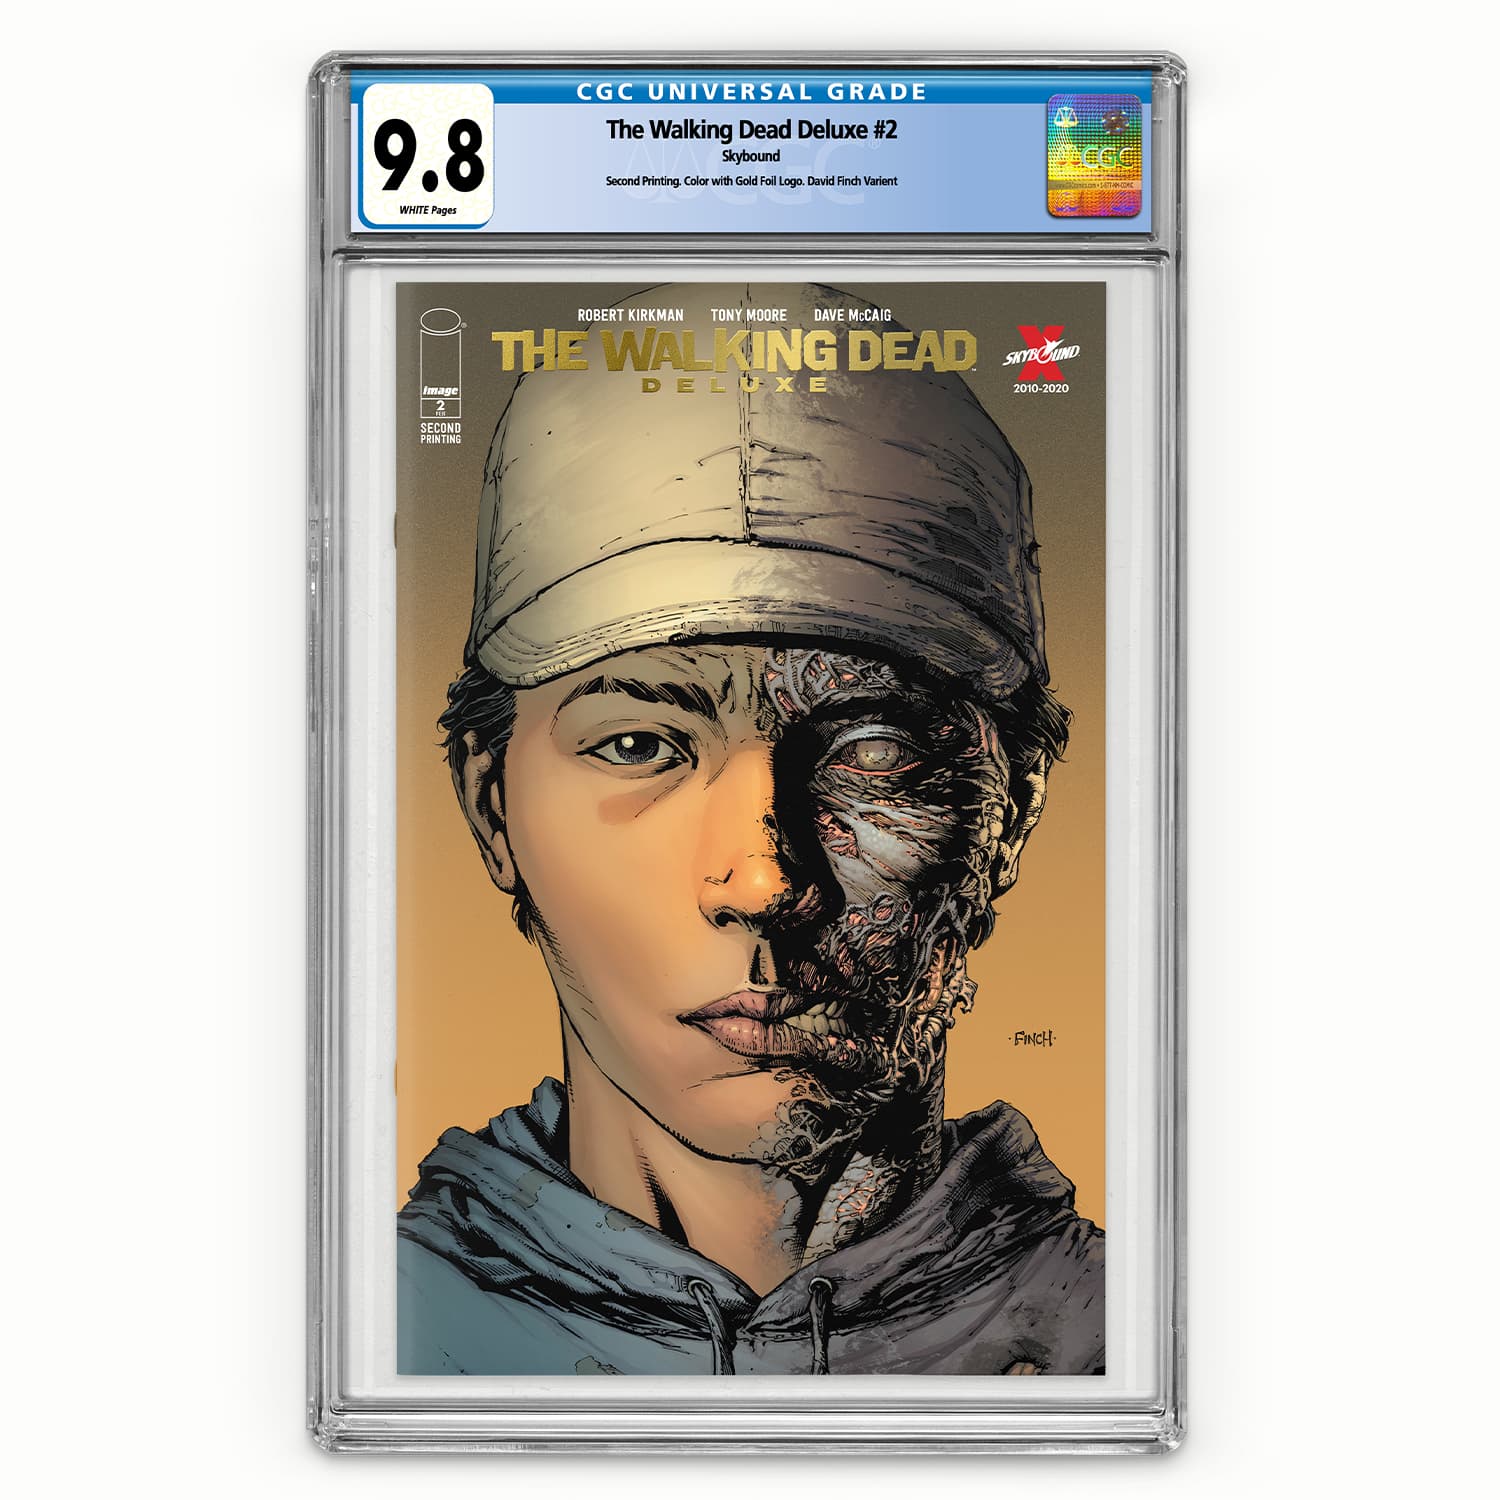 The Walking Dead Deluxe #2 Second Print Color with Gold Foil Logo CGC 9.8